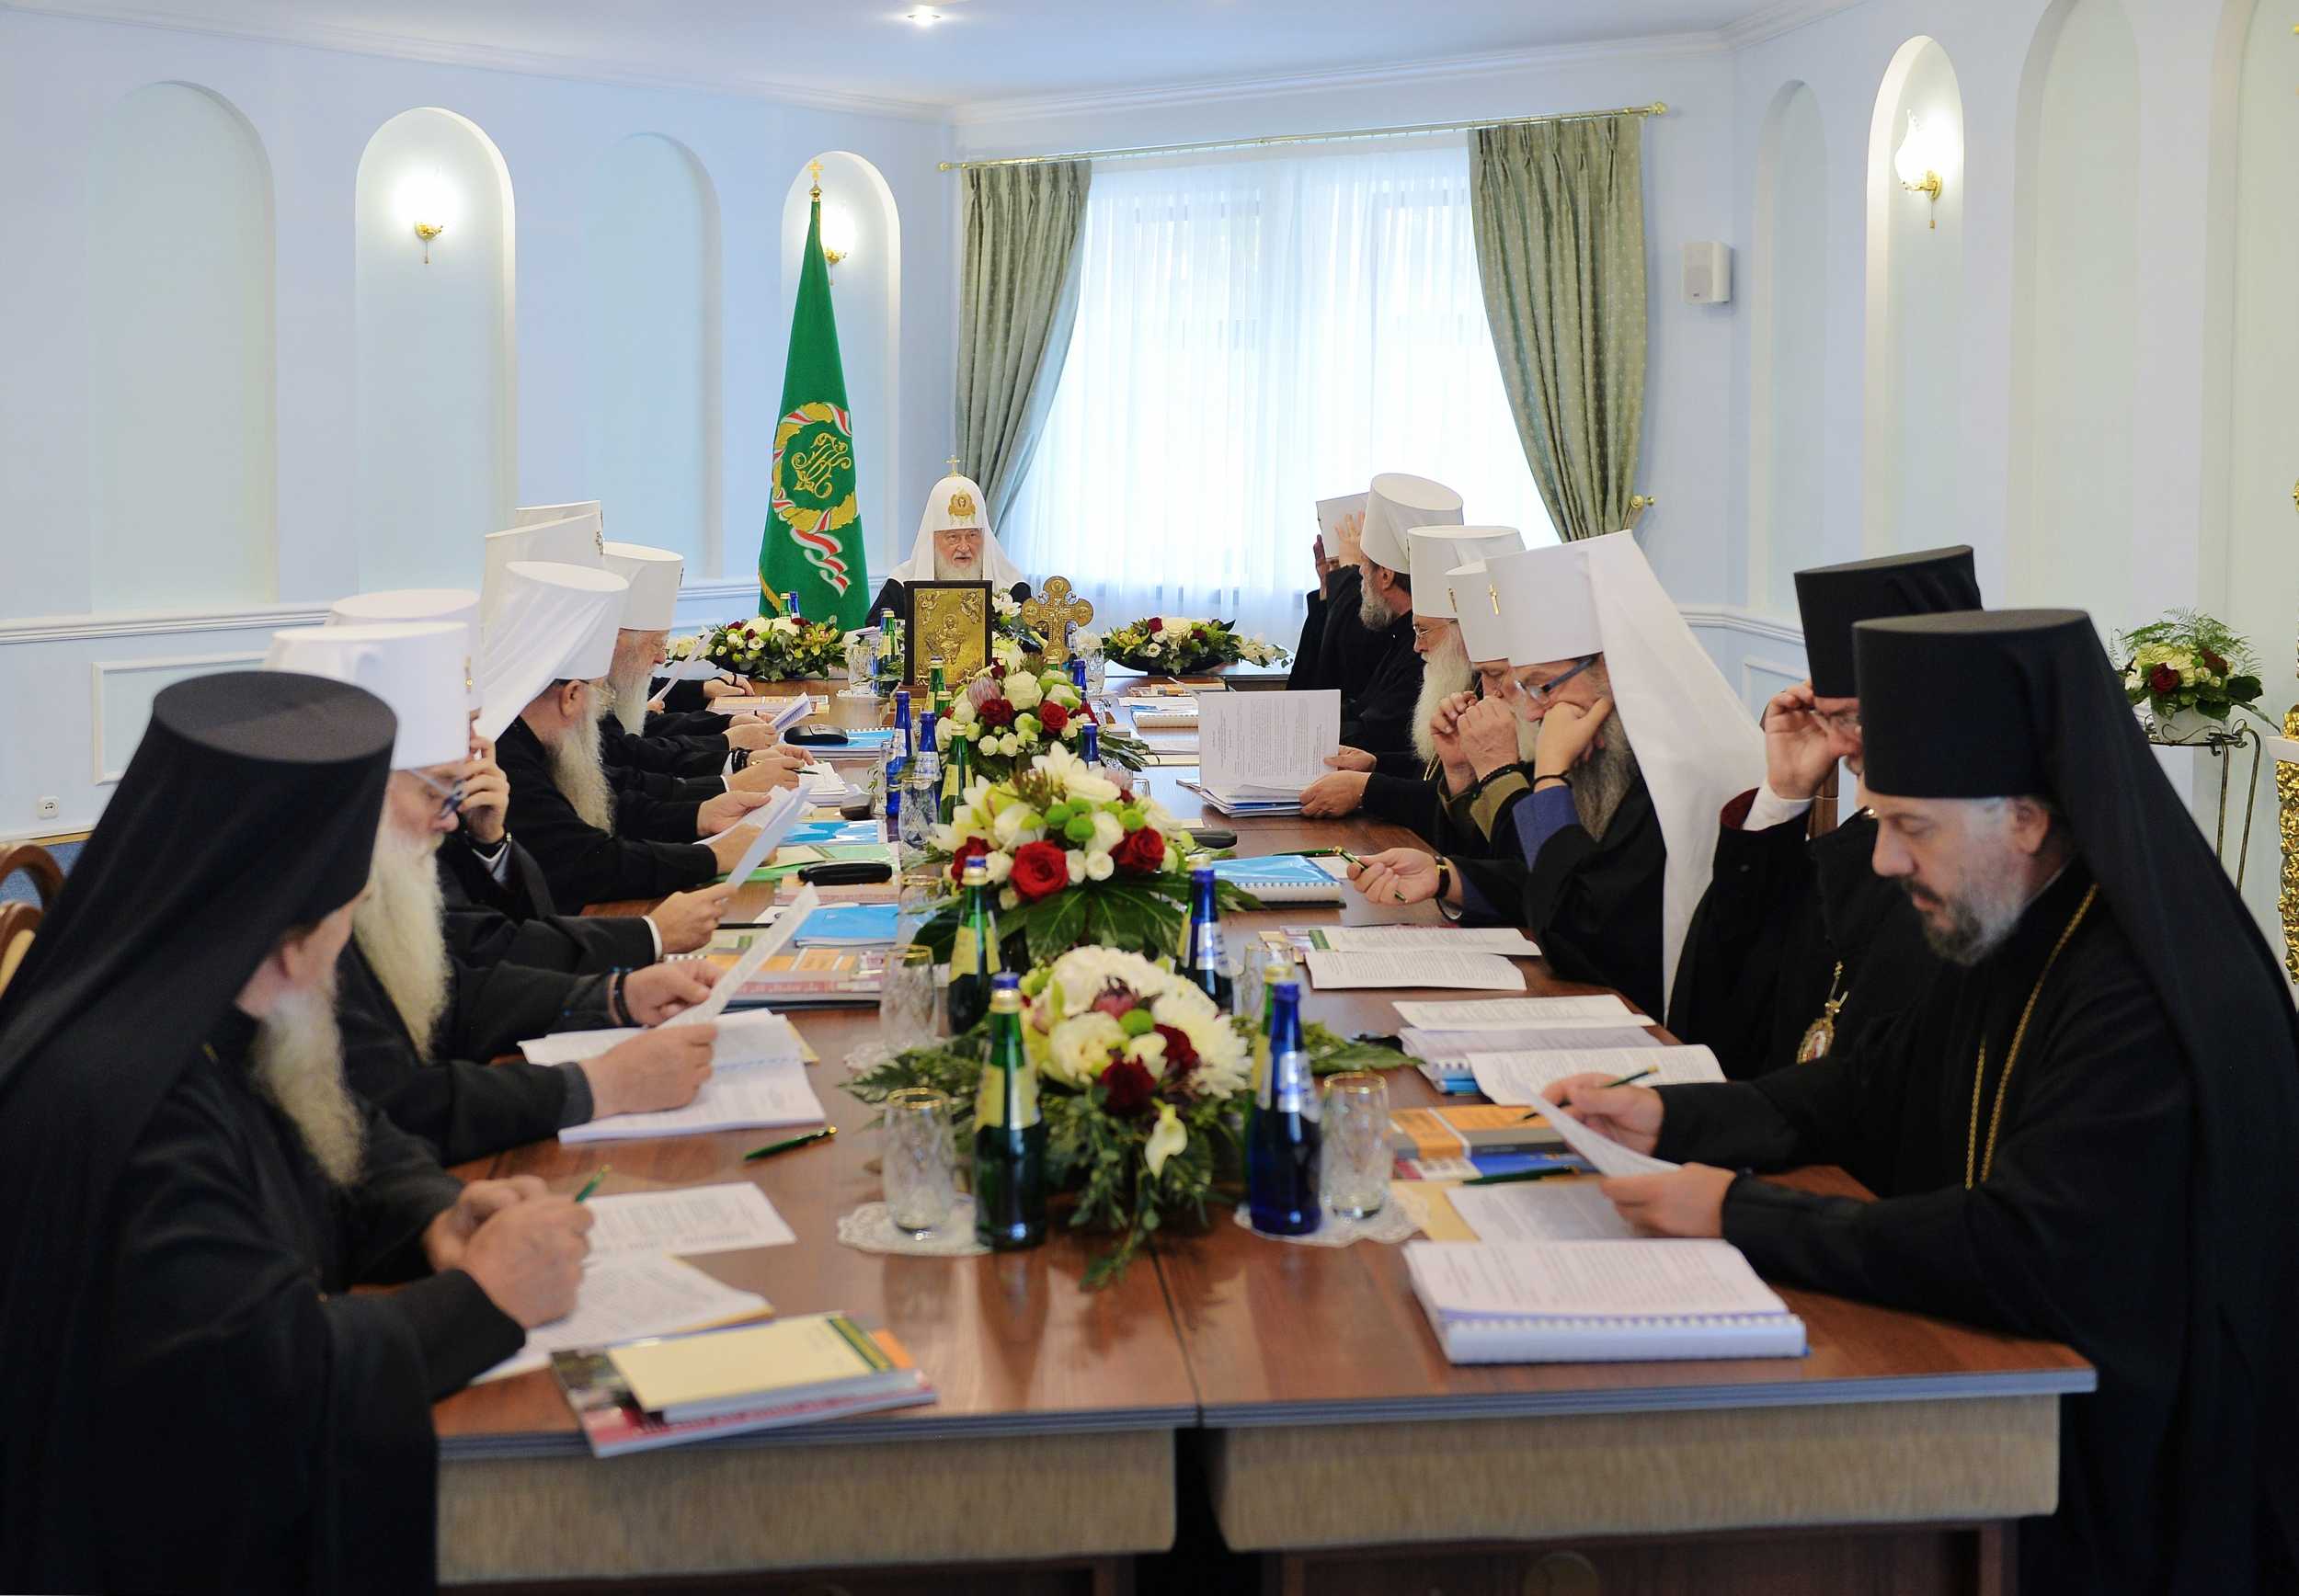 Russian Orthodox Church – It is impossible to Continue in Eucharistic Communion with the Patriarchate of Constantinople